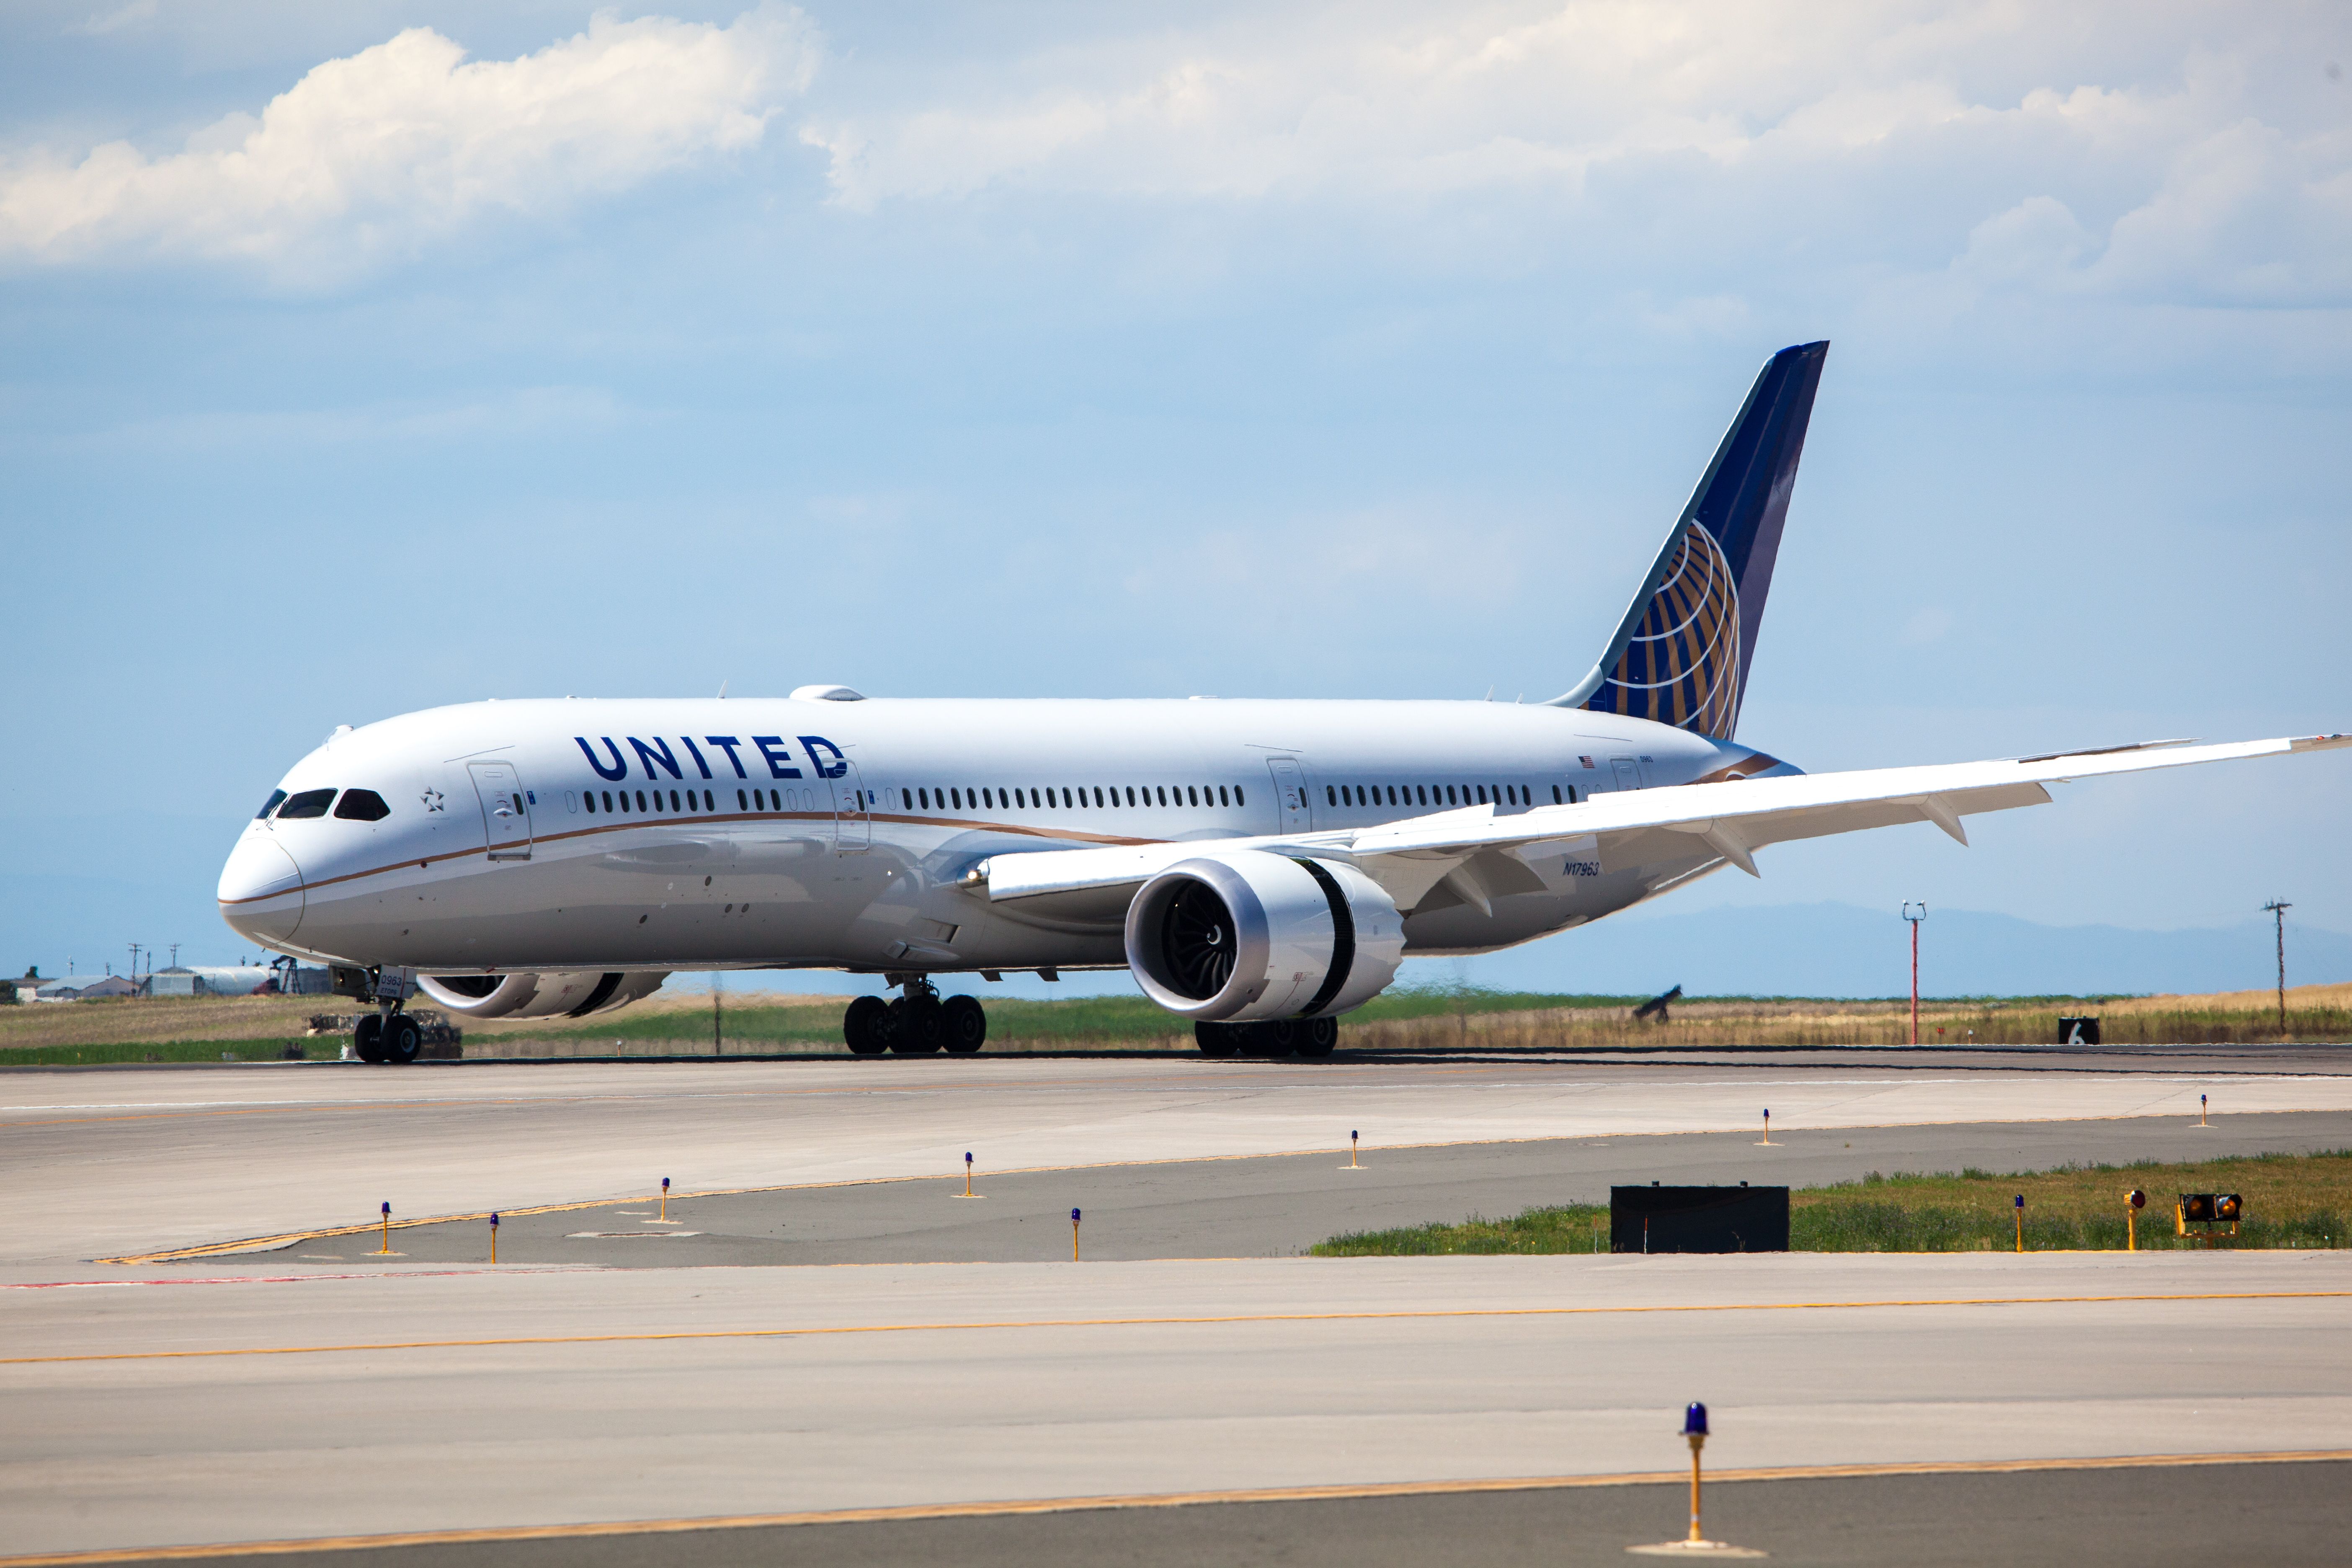 A United Airlines 787-900 Dreamliner